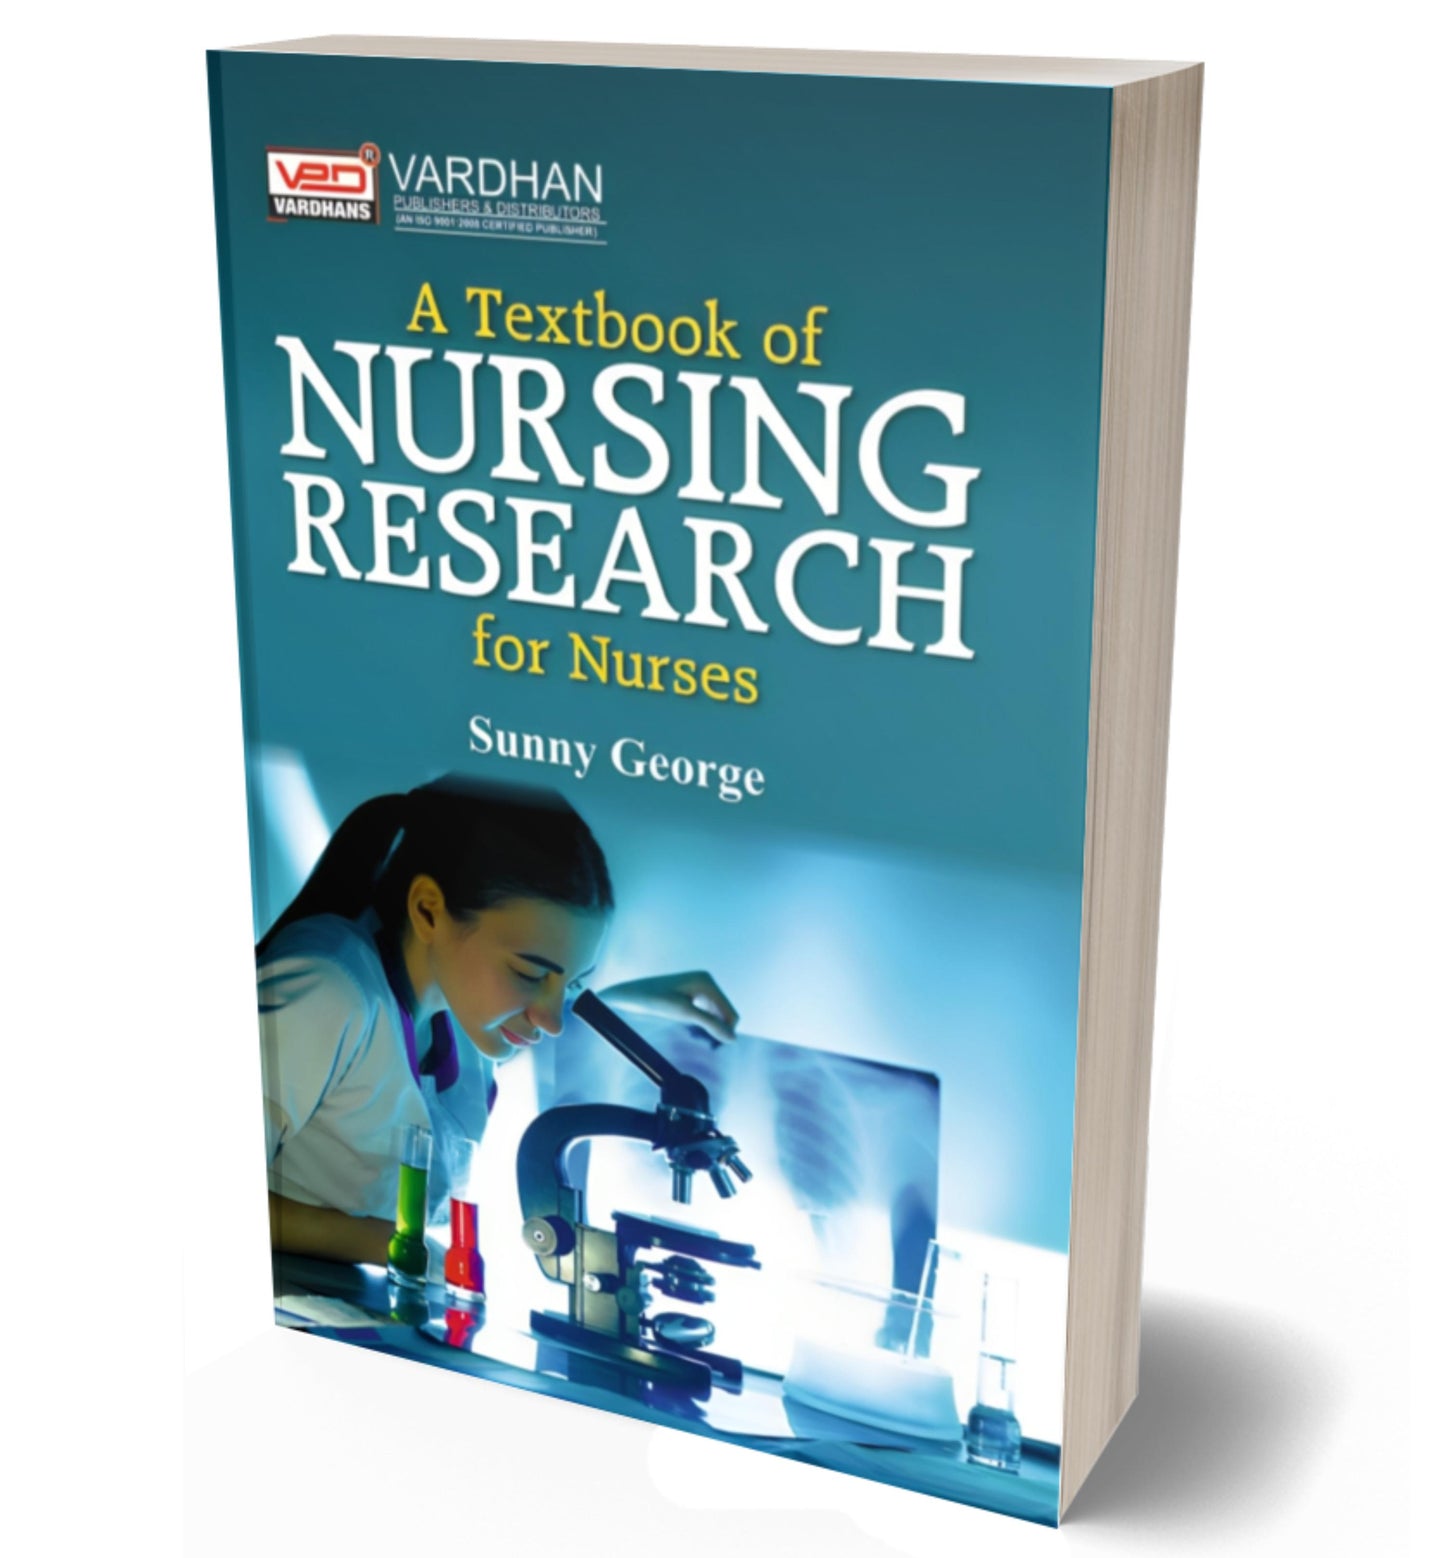 A Textbook of Nursing Research for Nurses